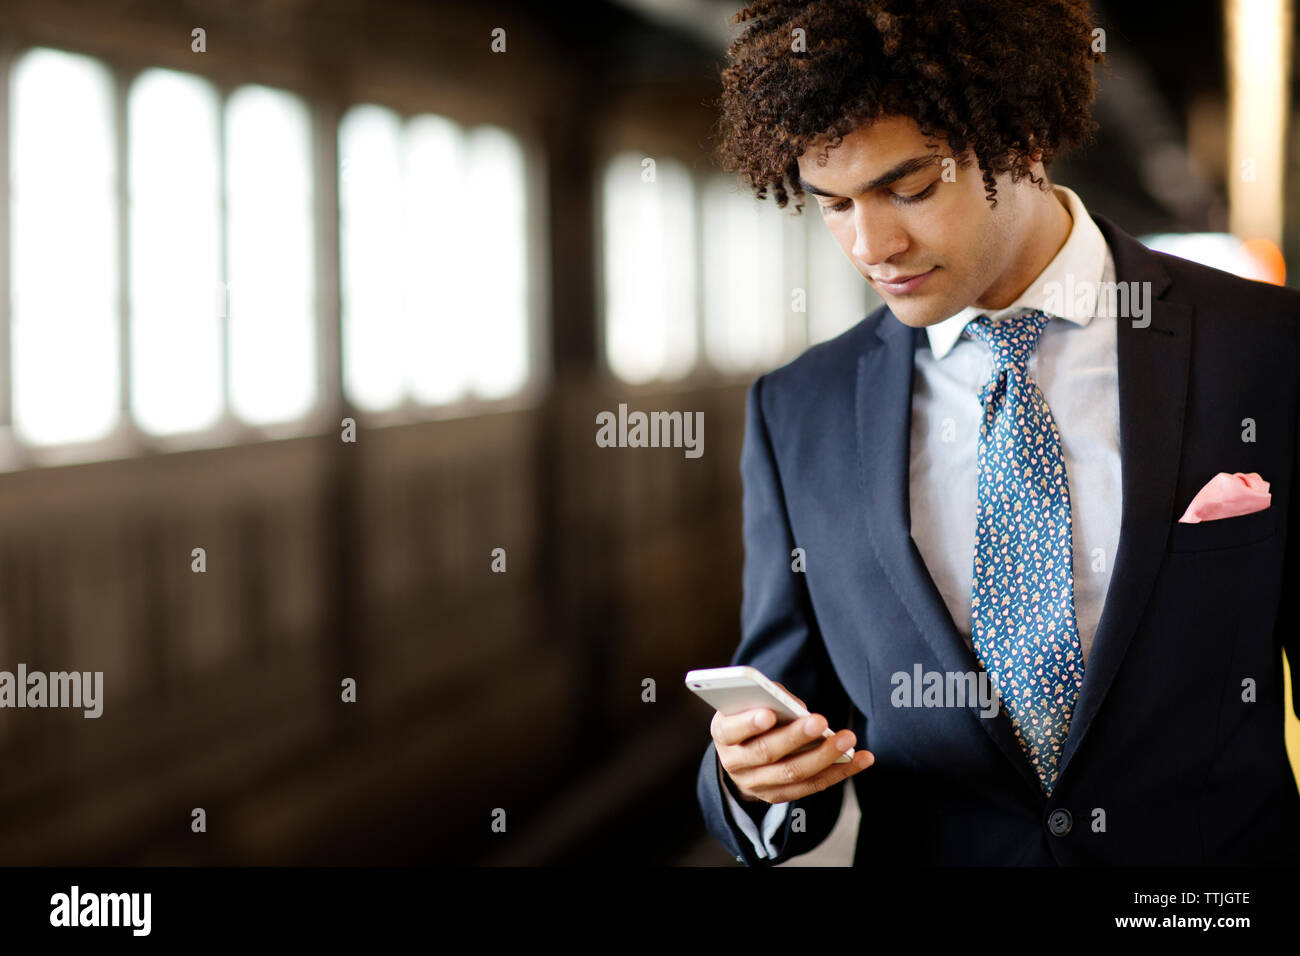 Businessman using phone while standing at station Stock Photo